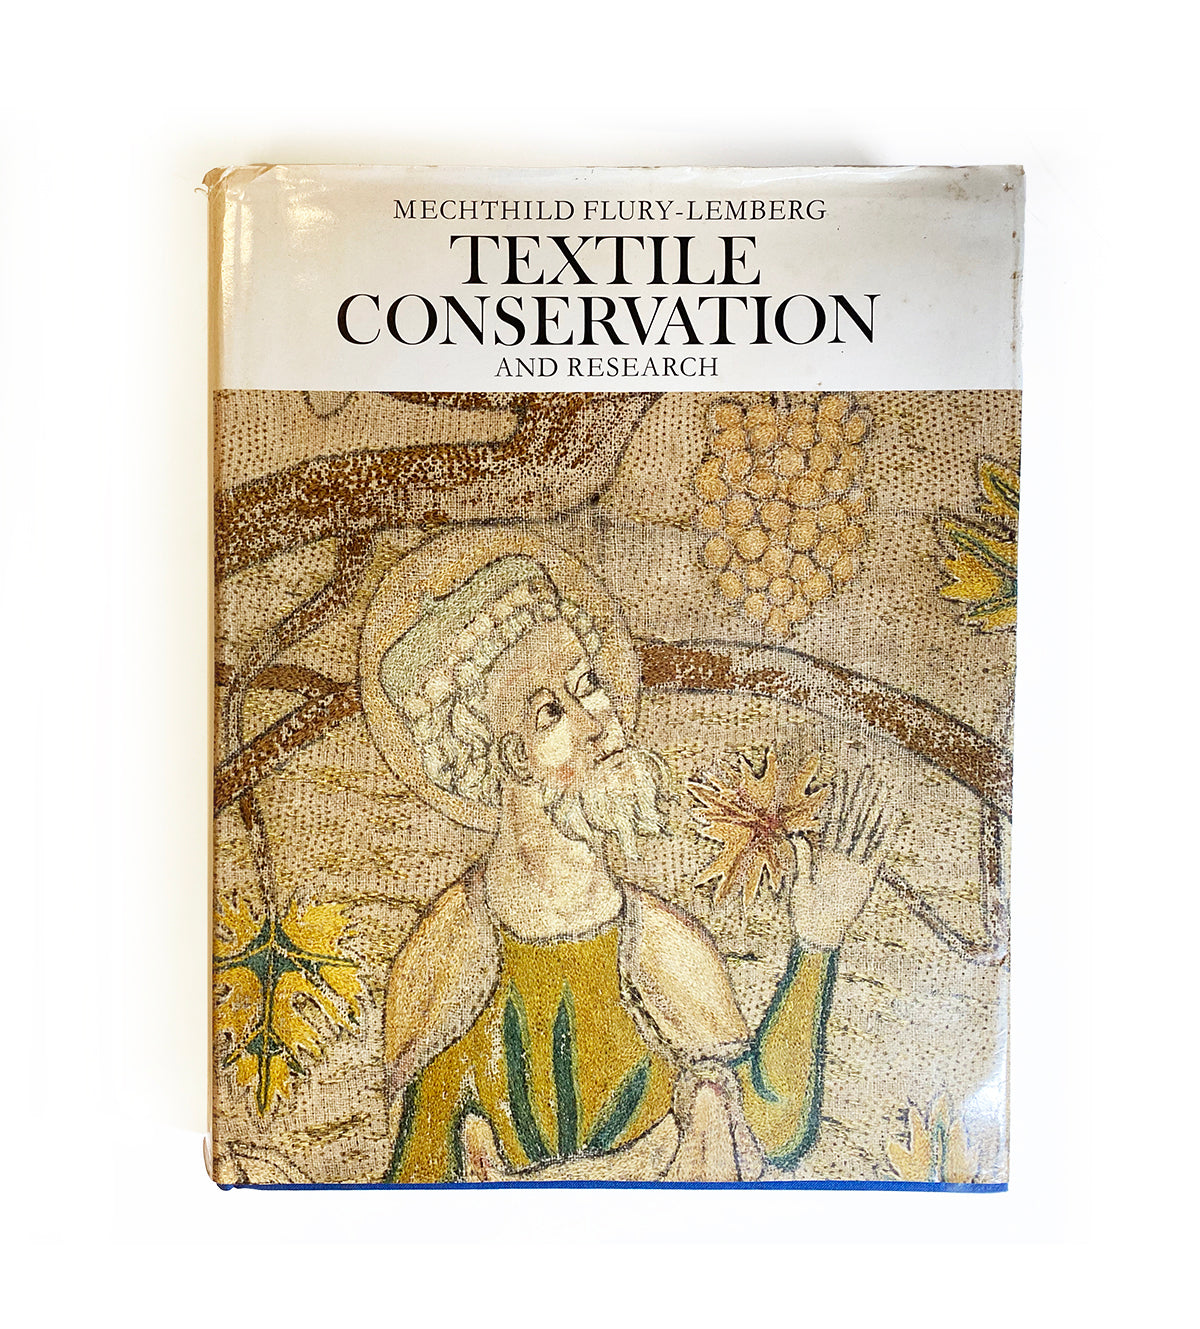 TEXTILE CONSERVATION AND RESEARCH